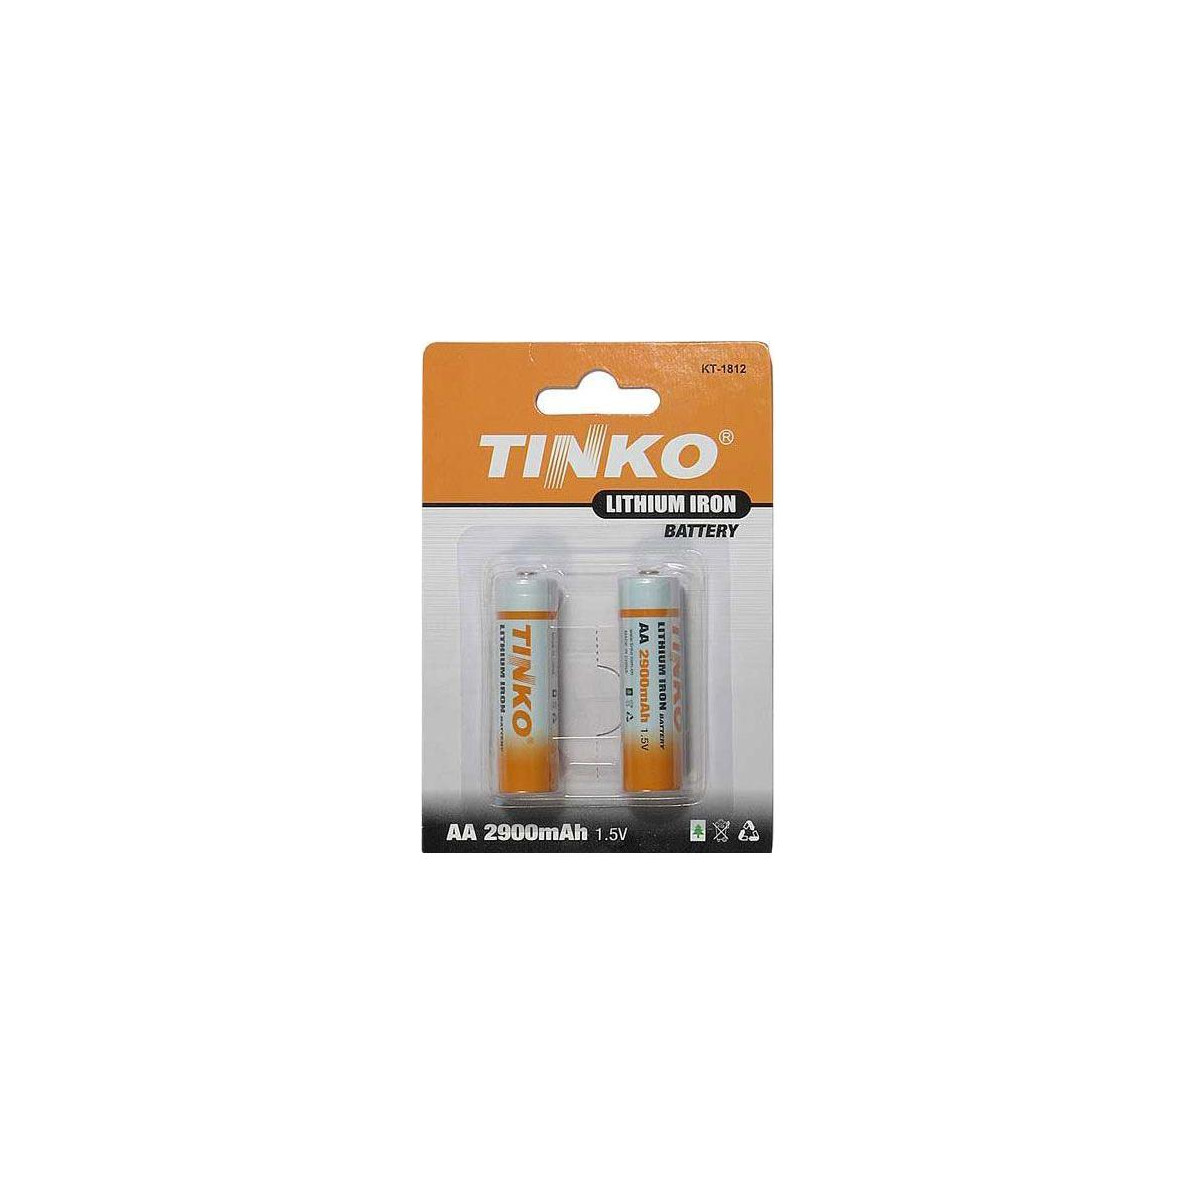 More about Baterie lithiová AA R6 1,5V/2900mAh TINKO 2ks